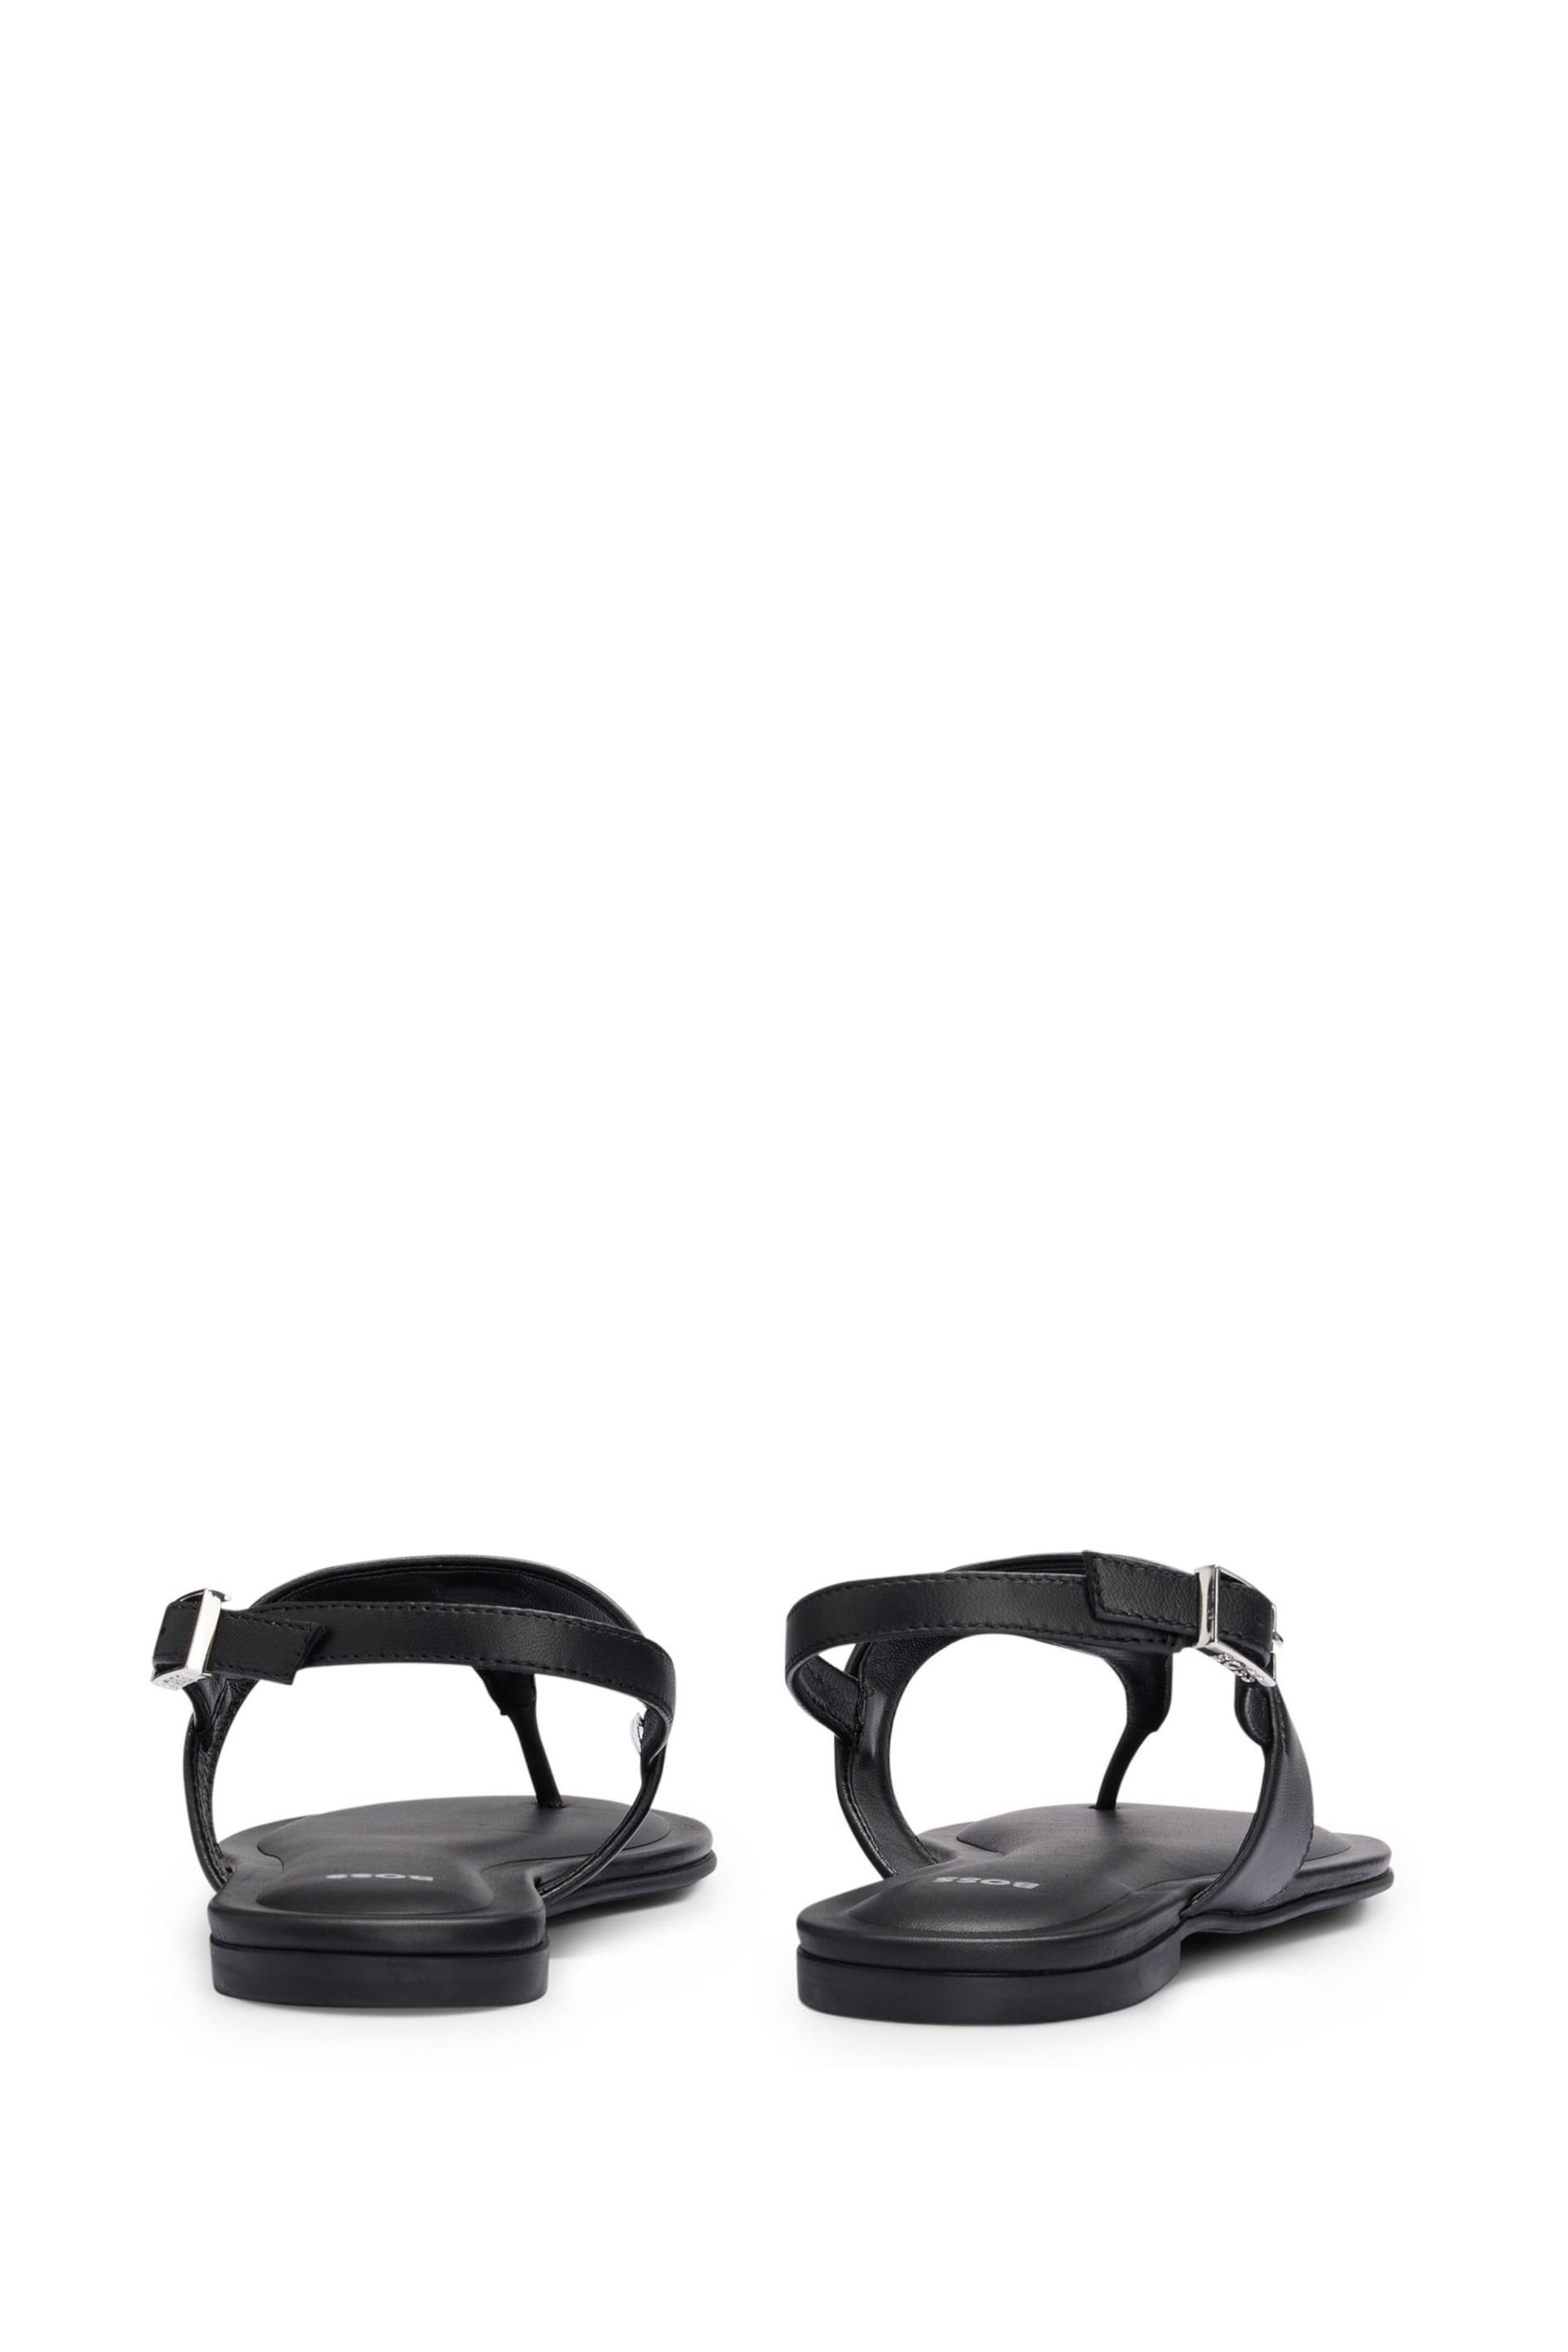 BOSS Black Toe Post Nappa Leather Sandals - Image 3 of 4